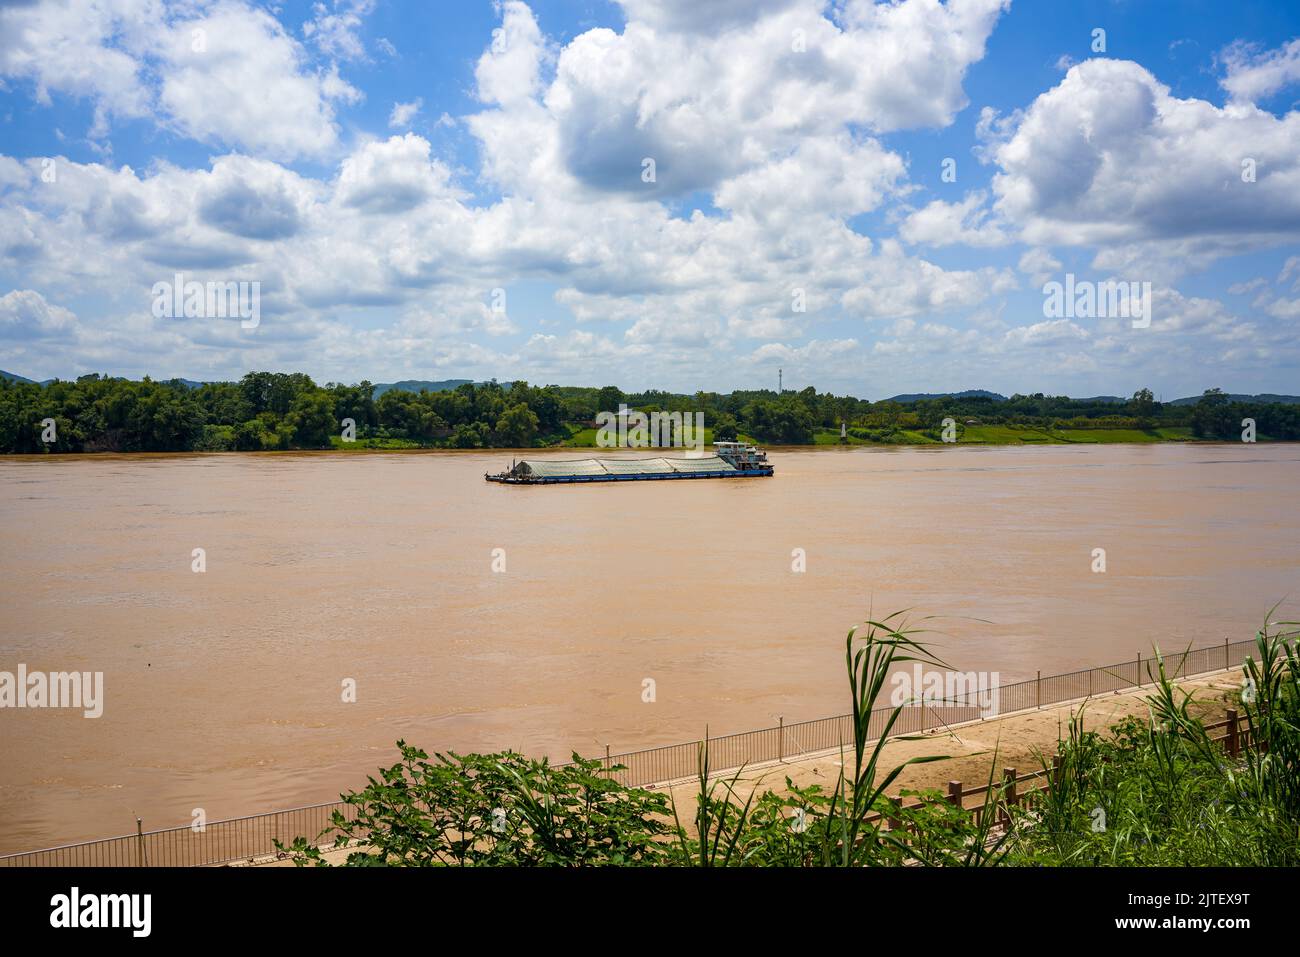 Large sand mining boat driving on the river outdoors Stock Photo